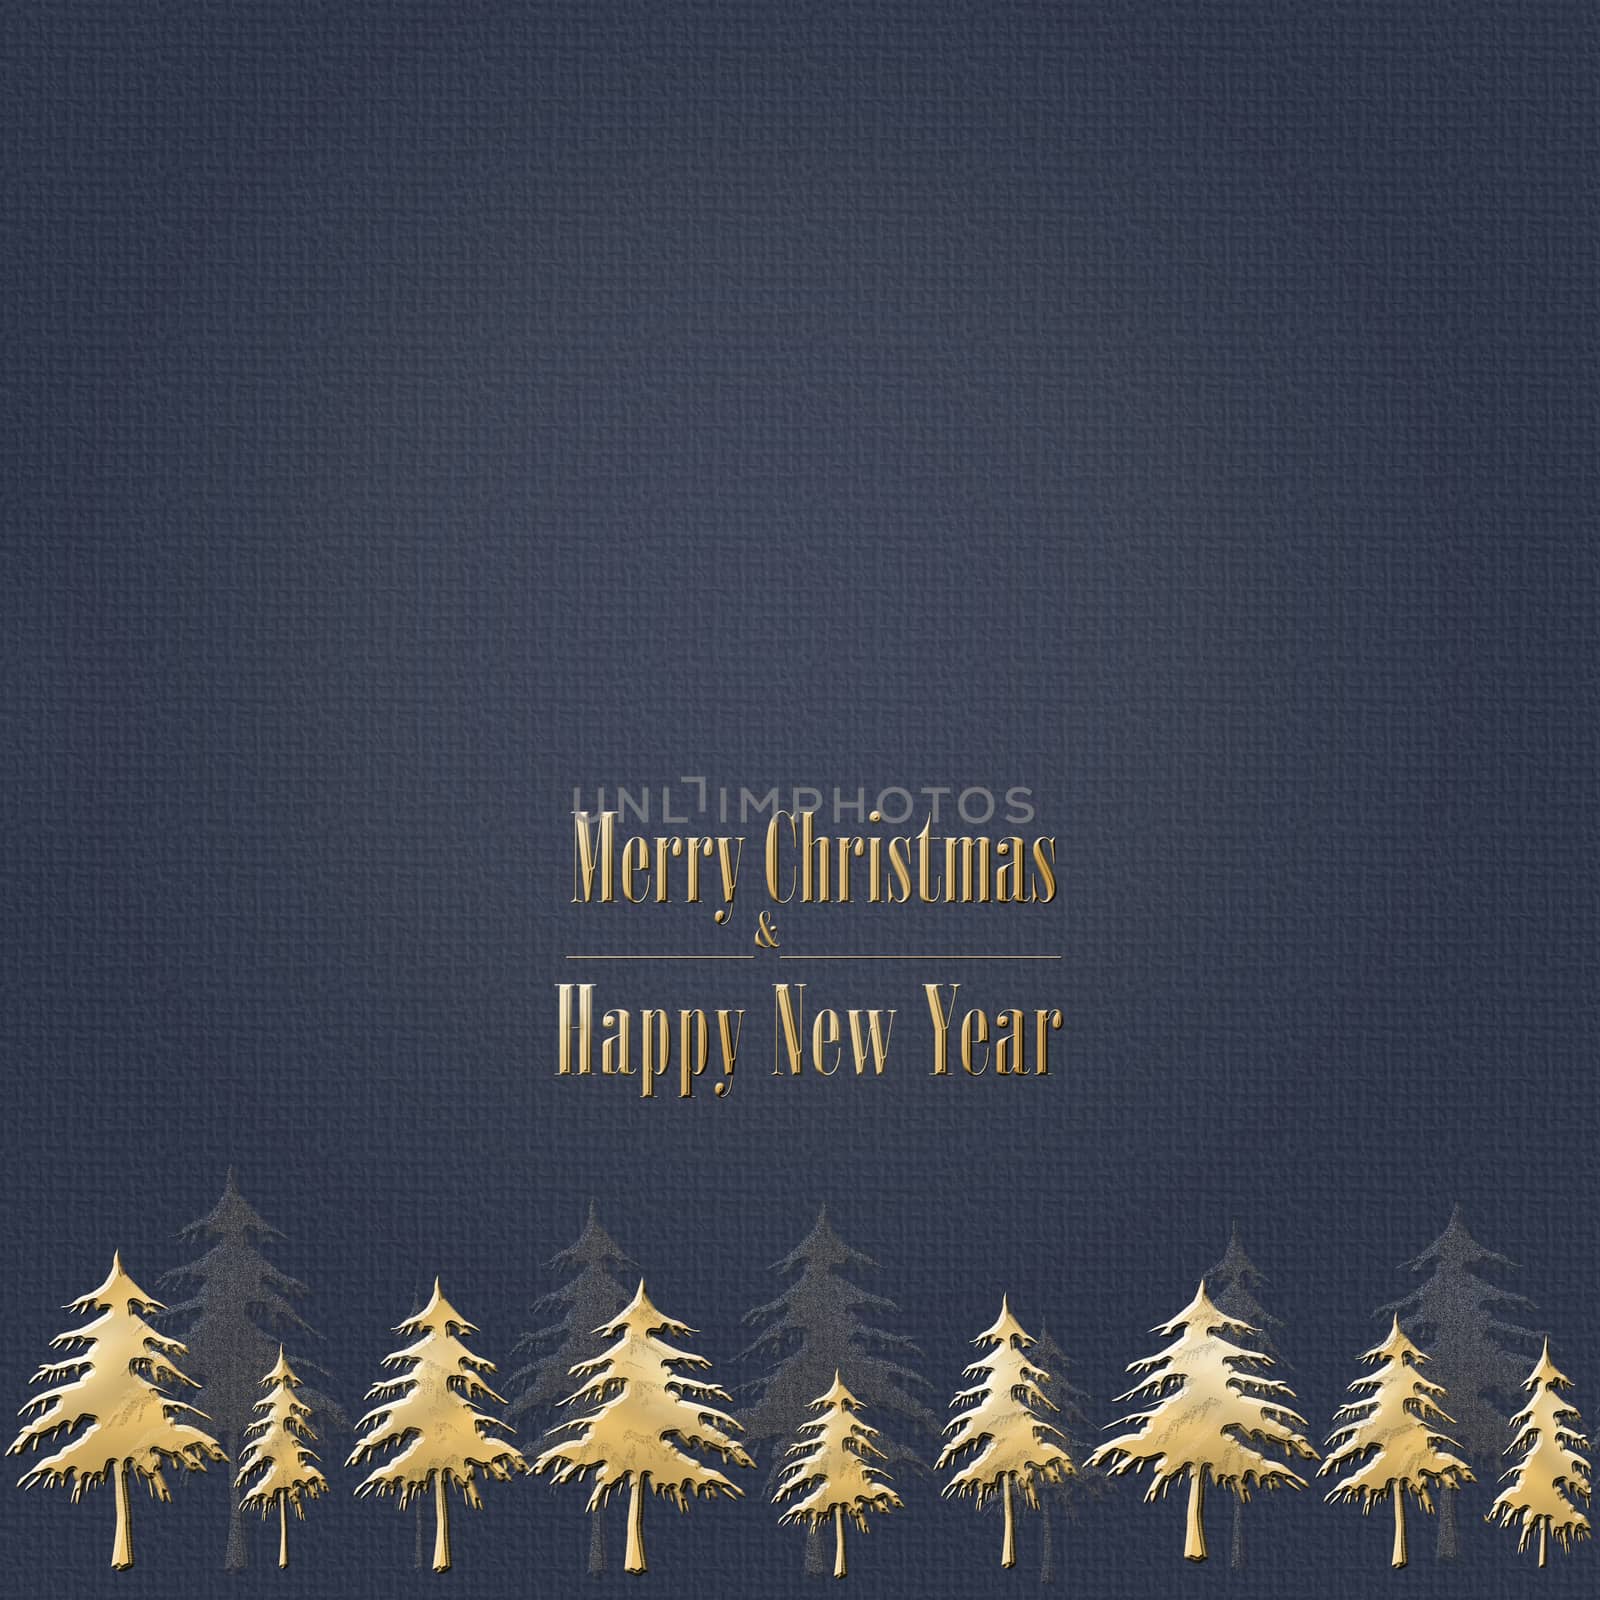 Elegant stylish Christmas card on blue background with tree, gold text Merry Christmas and Happy New Year. Minimalist template design for greeting cards, banner, marketing, copy space. 3D illustration